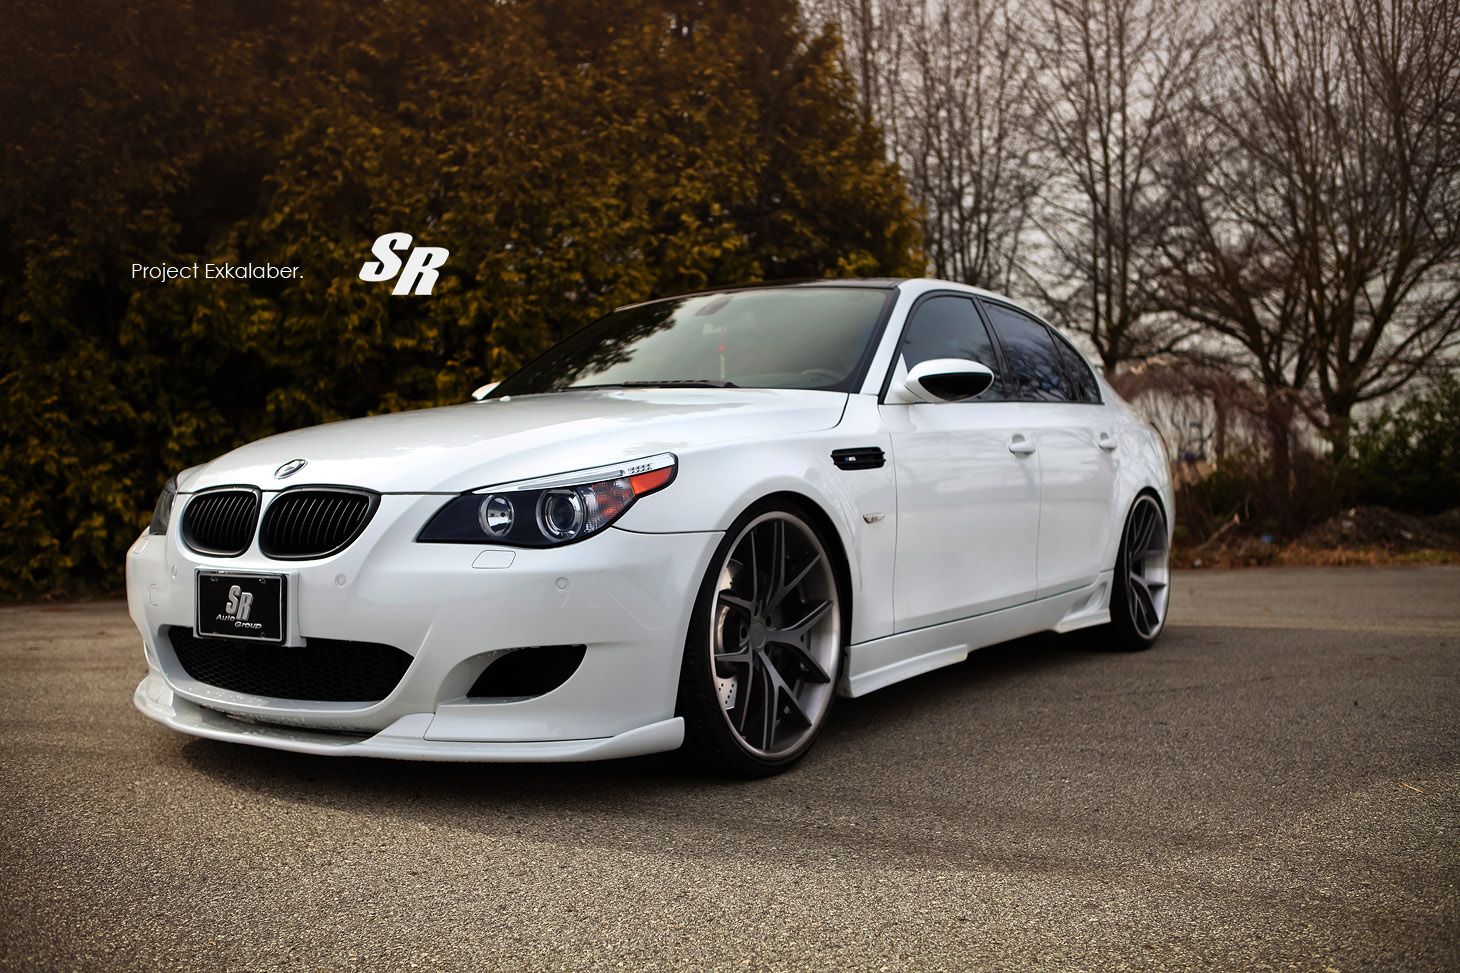 2010 BMW M5 Project Exkalaber by SR Auto Group